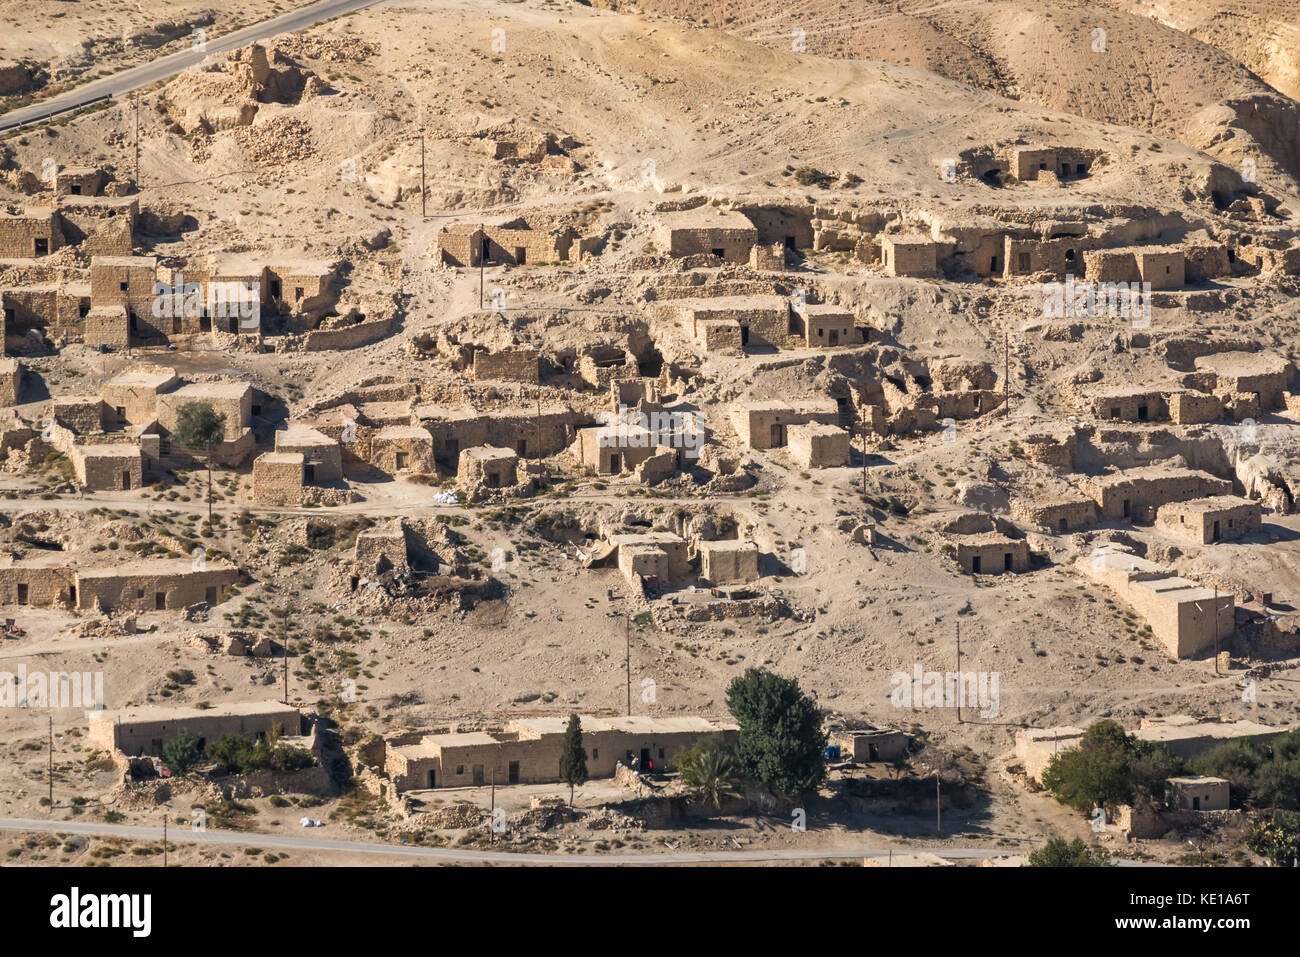 View on Kings Highway of desert valley with mud brick houses in a village, Jordan, Middle East Stock Photo